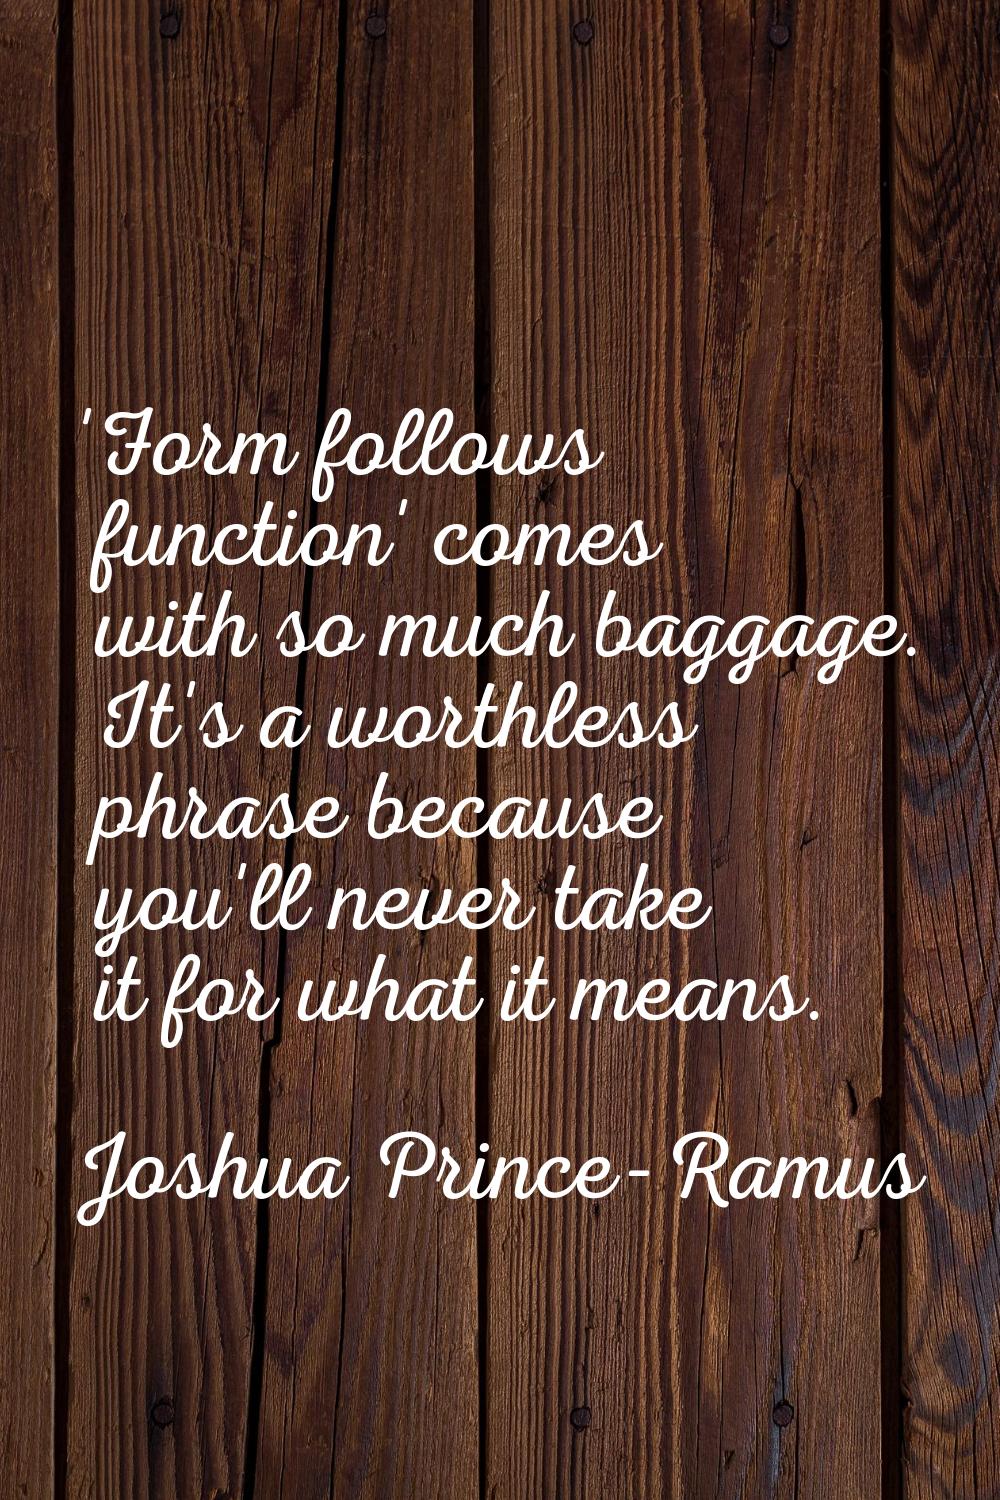 'Form follows function' comes with so much baggage. It's a worthless phrase because you'll never ta